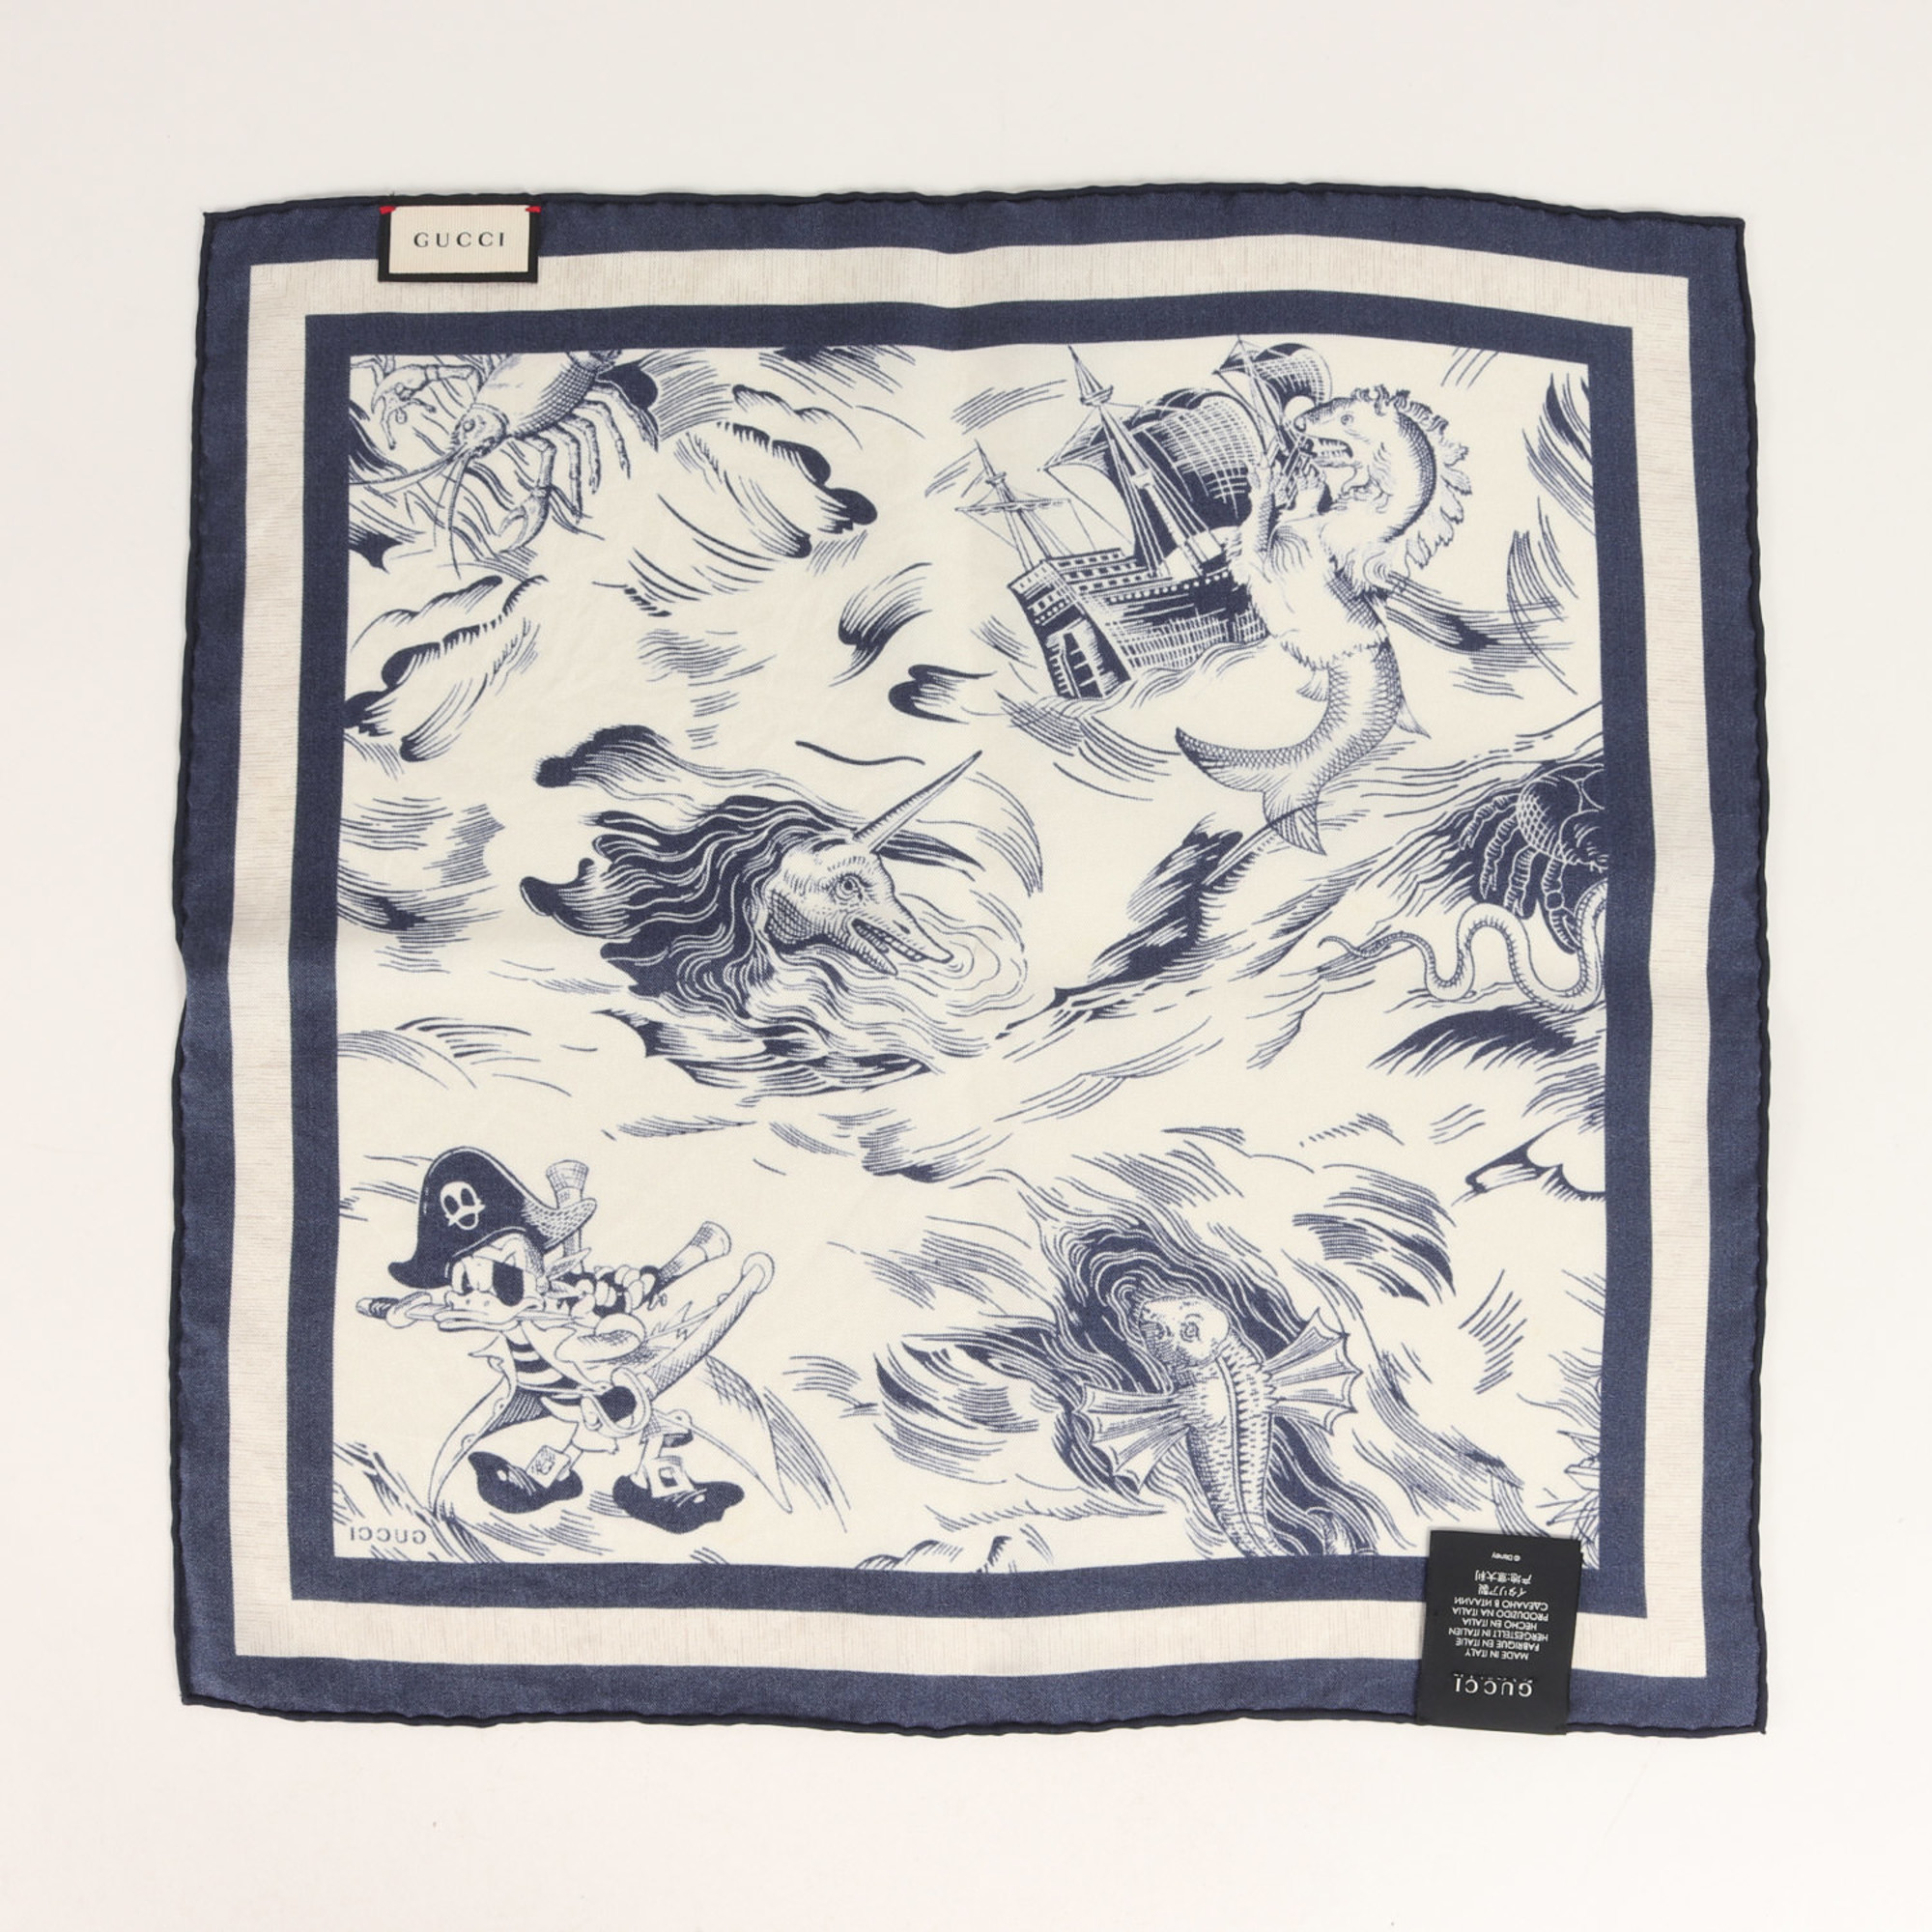 GUCCI Disney Pirates Donald Duck Handkerchief 461263 46001 9268 17SS Pirate Scarf White Navy 45cm x Made in Italy